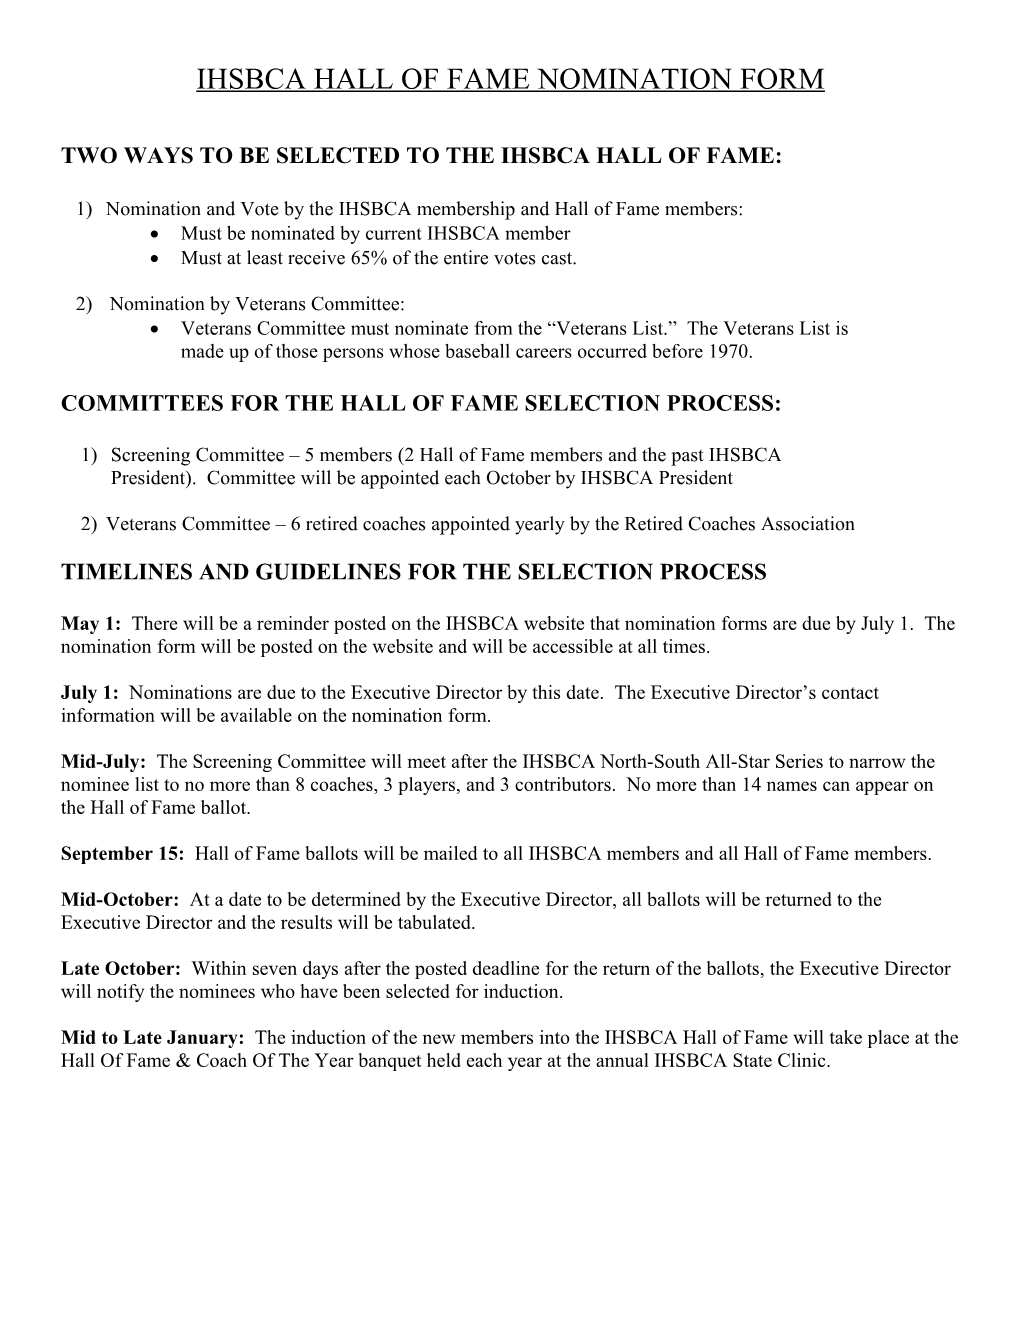 Two Ways to Be Selected to the Ihsbca Hall of Fame